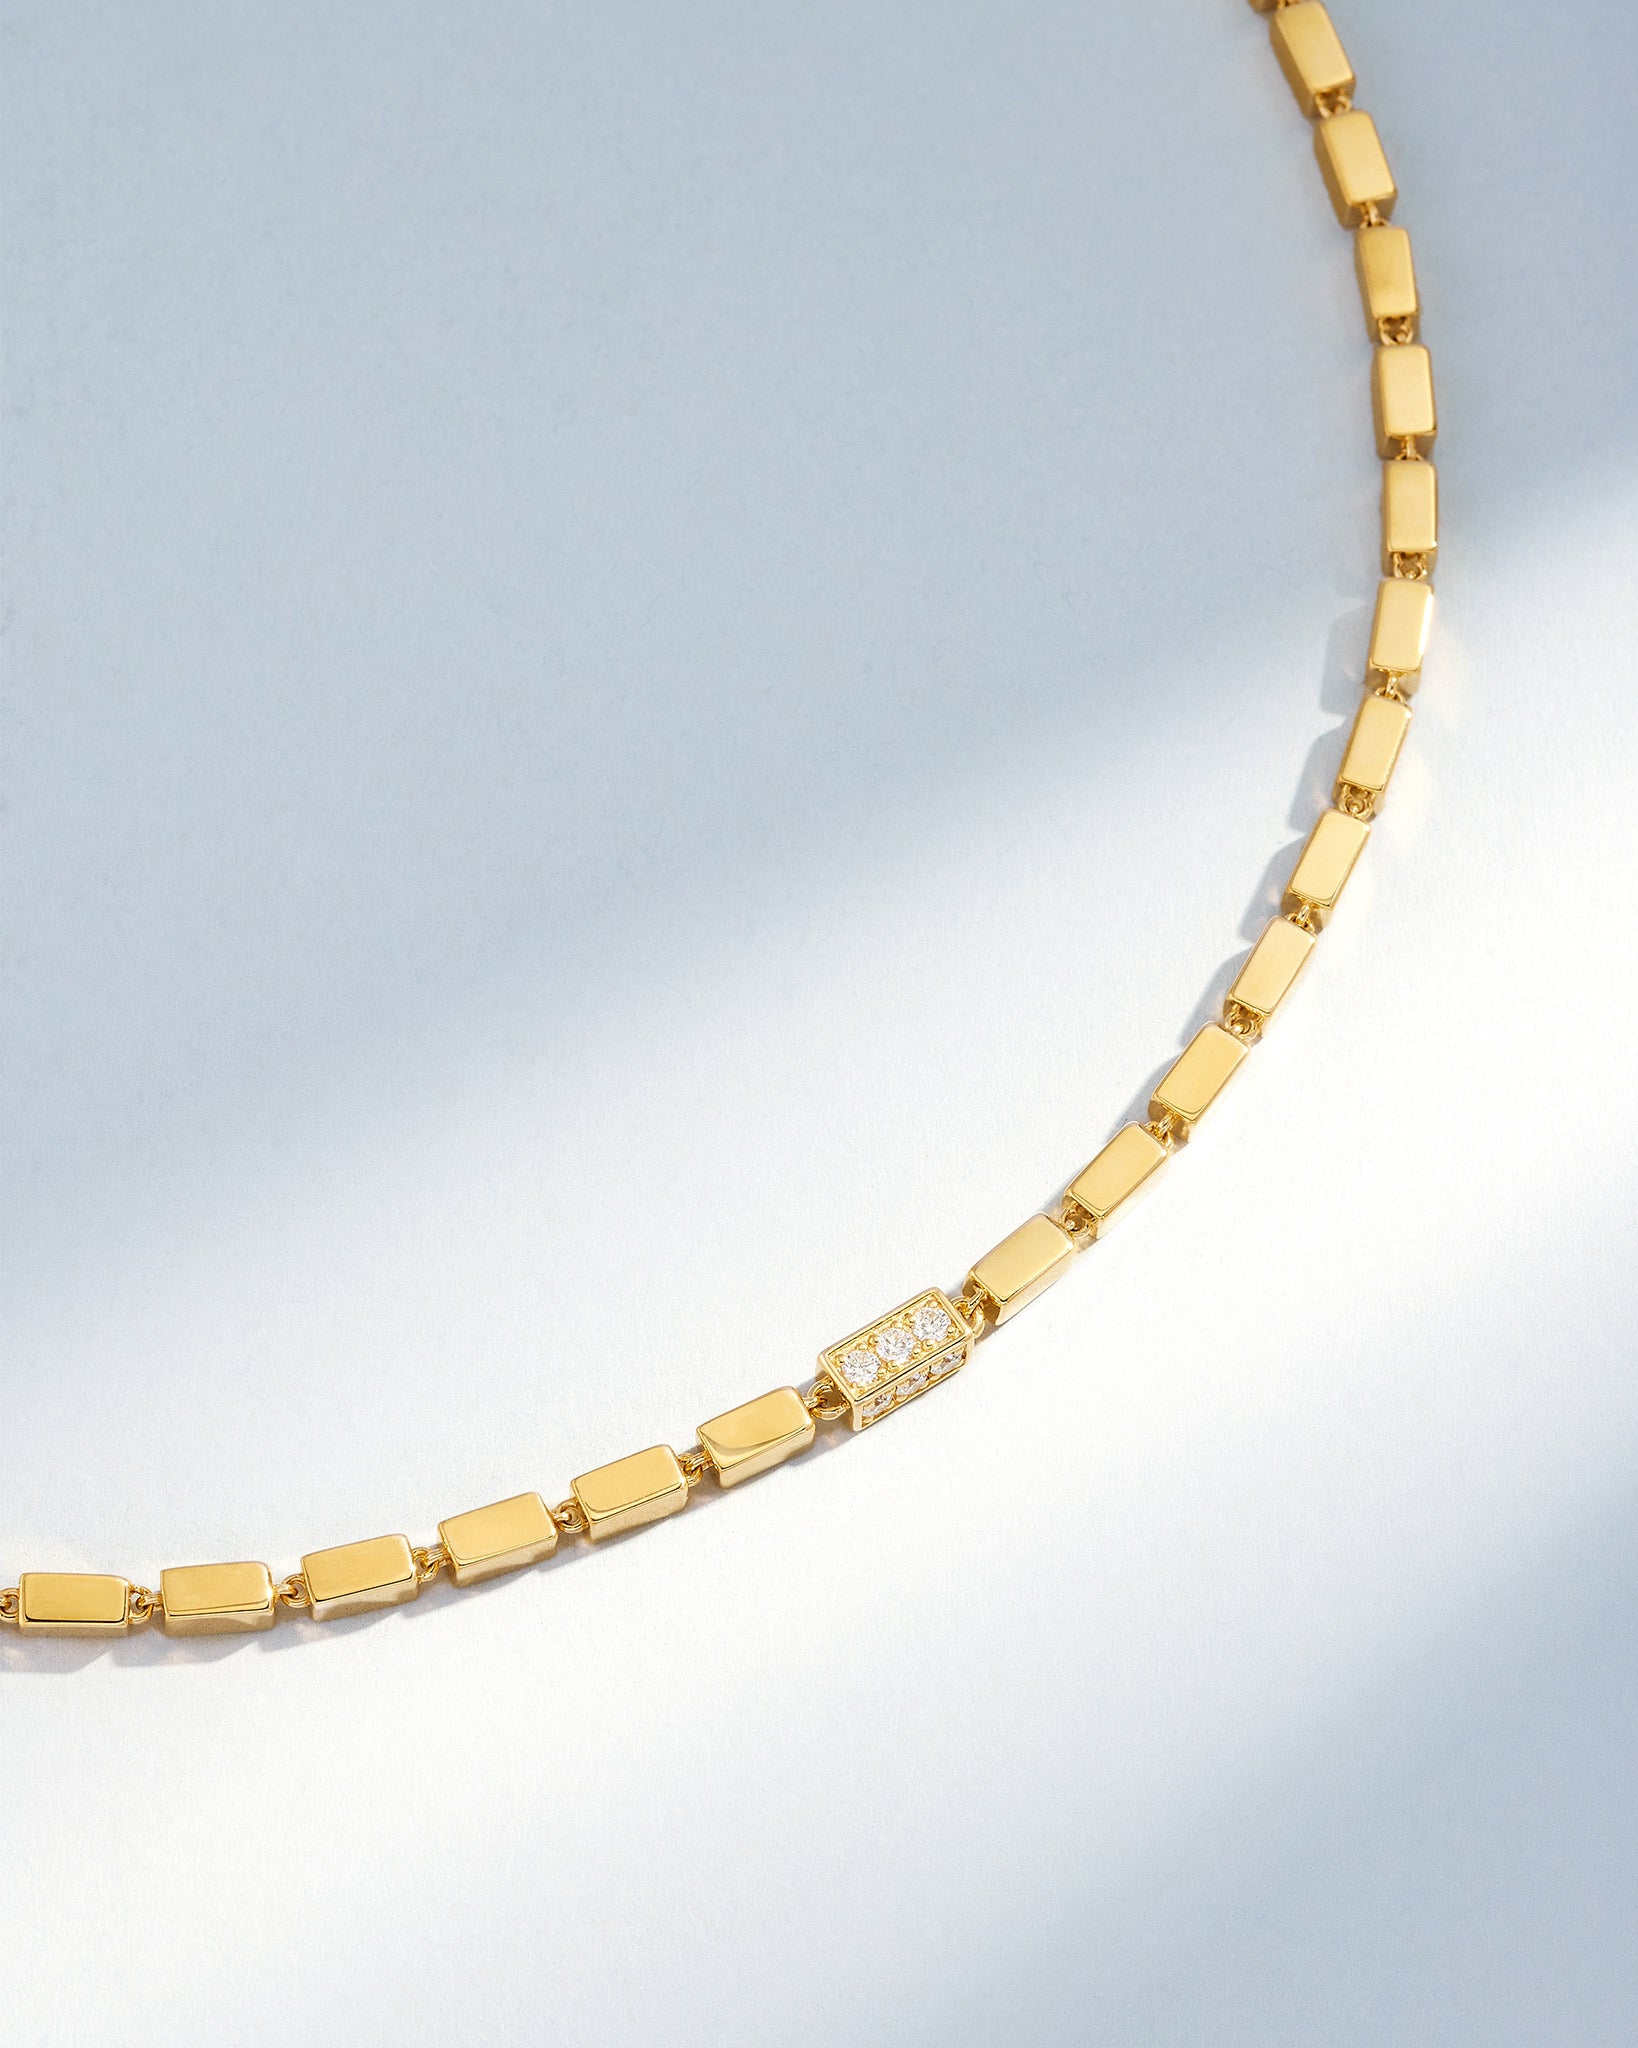 Suzanne Kalan Block-Chain Single Pave Diamond Thick Necklace in 18k yellow gold